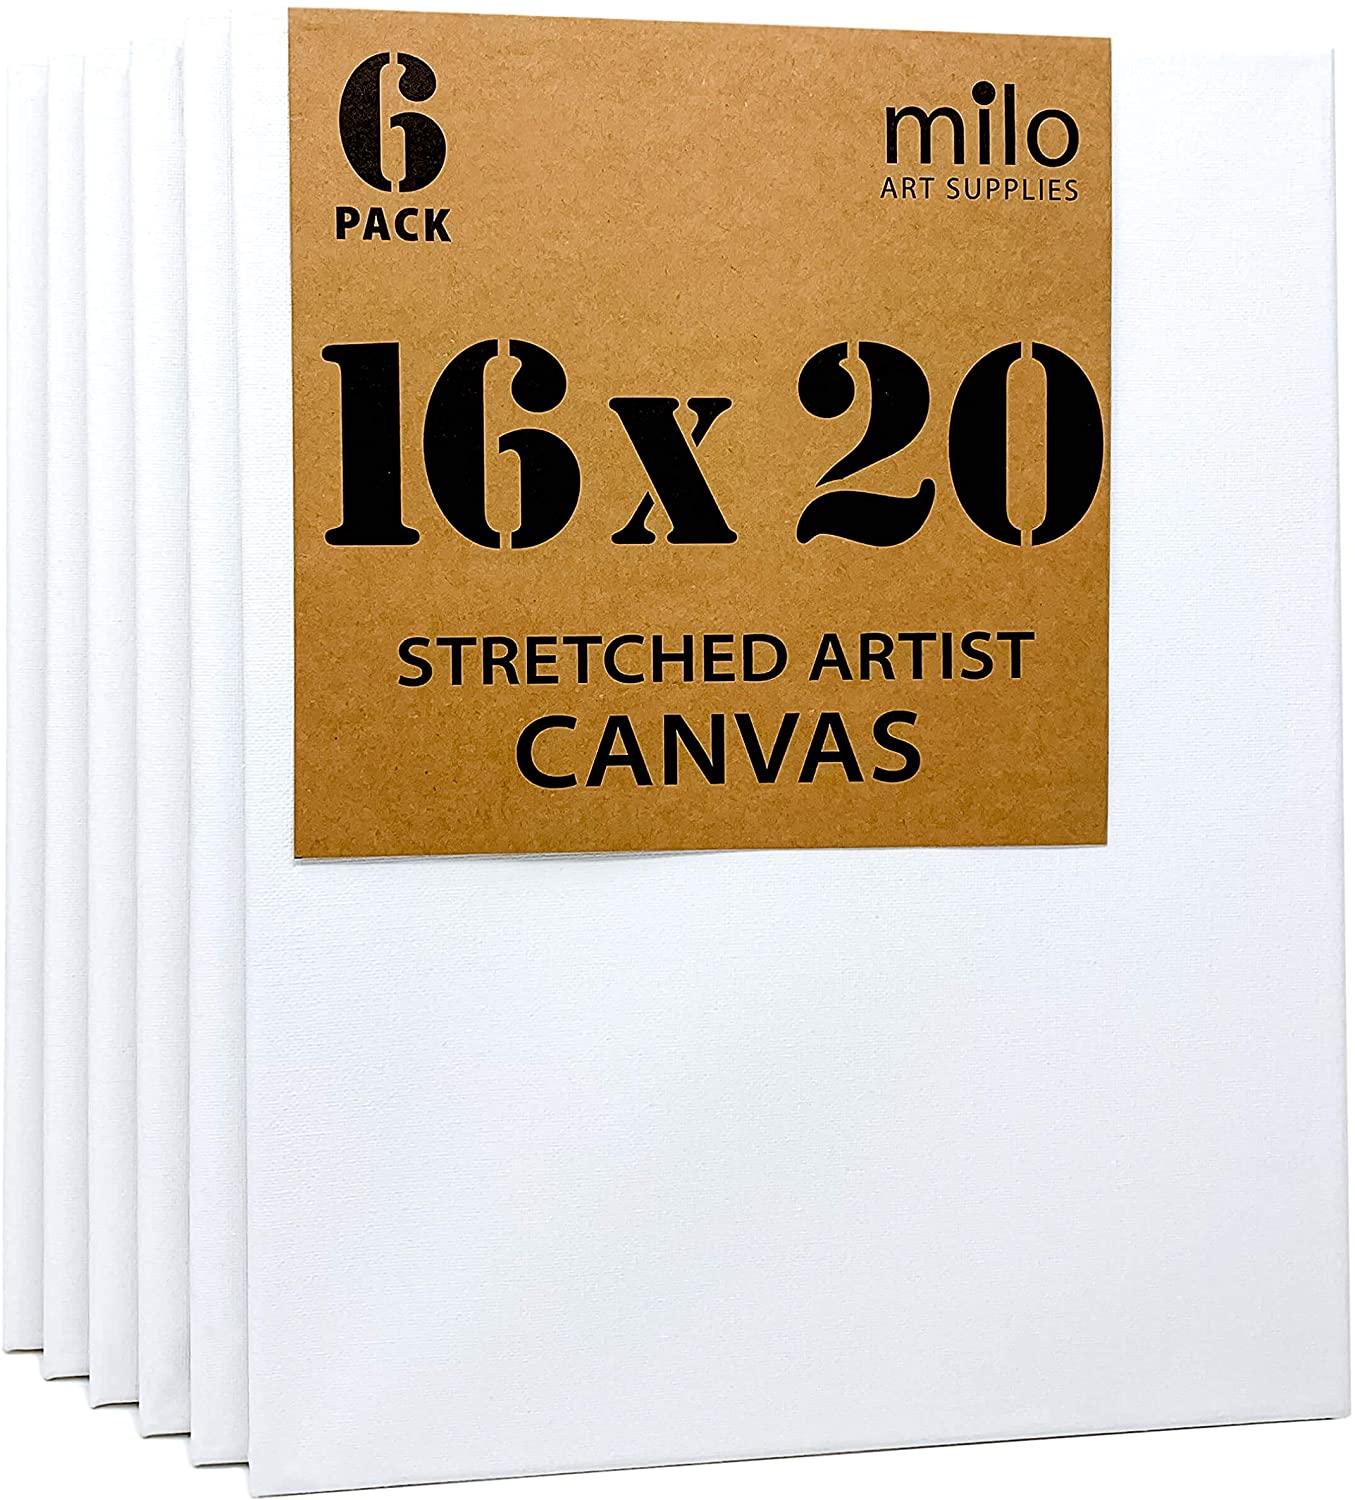 milo Stretched Artist Canvas | 16x20 inches | Value Pack of 6